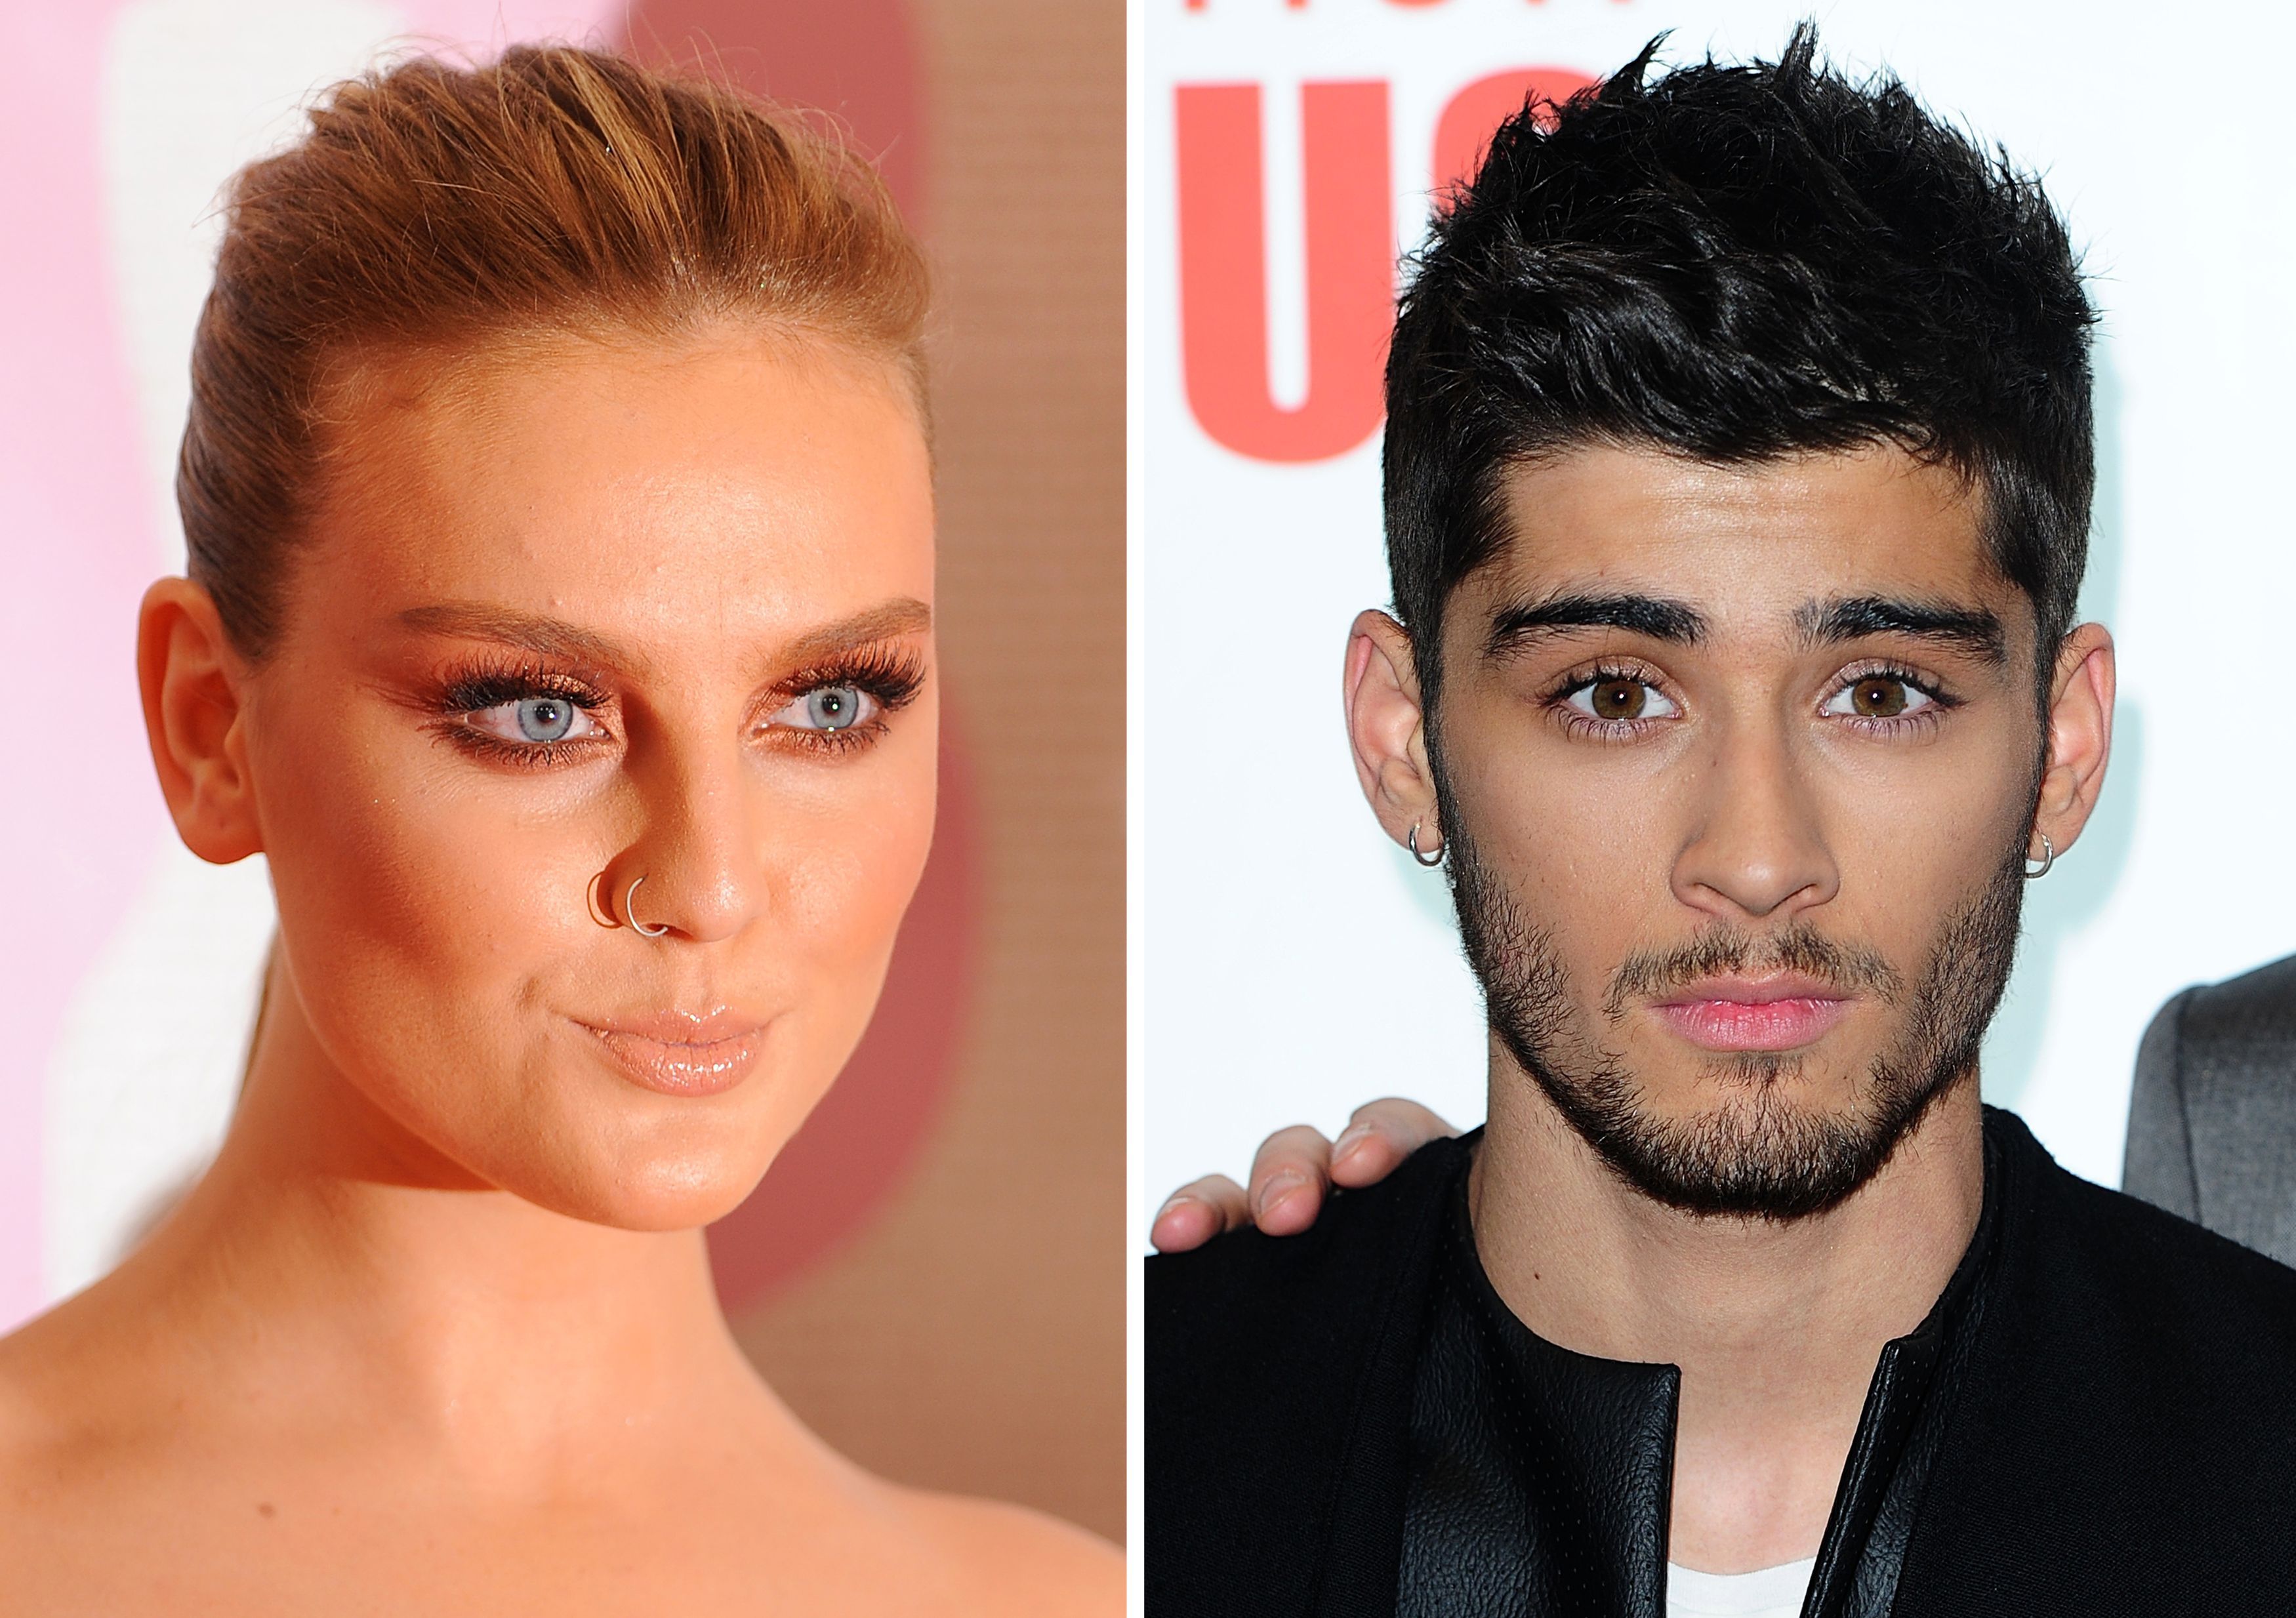 Perrie Edwards of Little Mix and Zayn Malik.